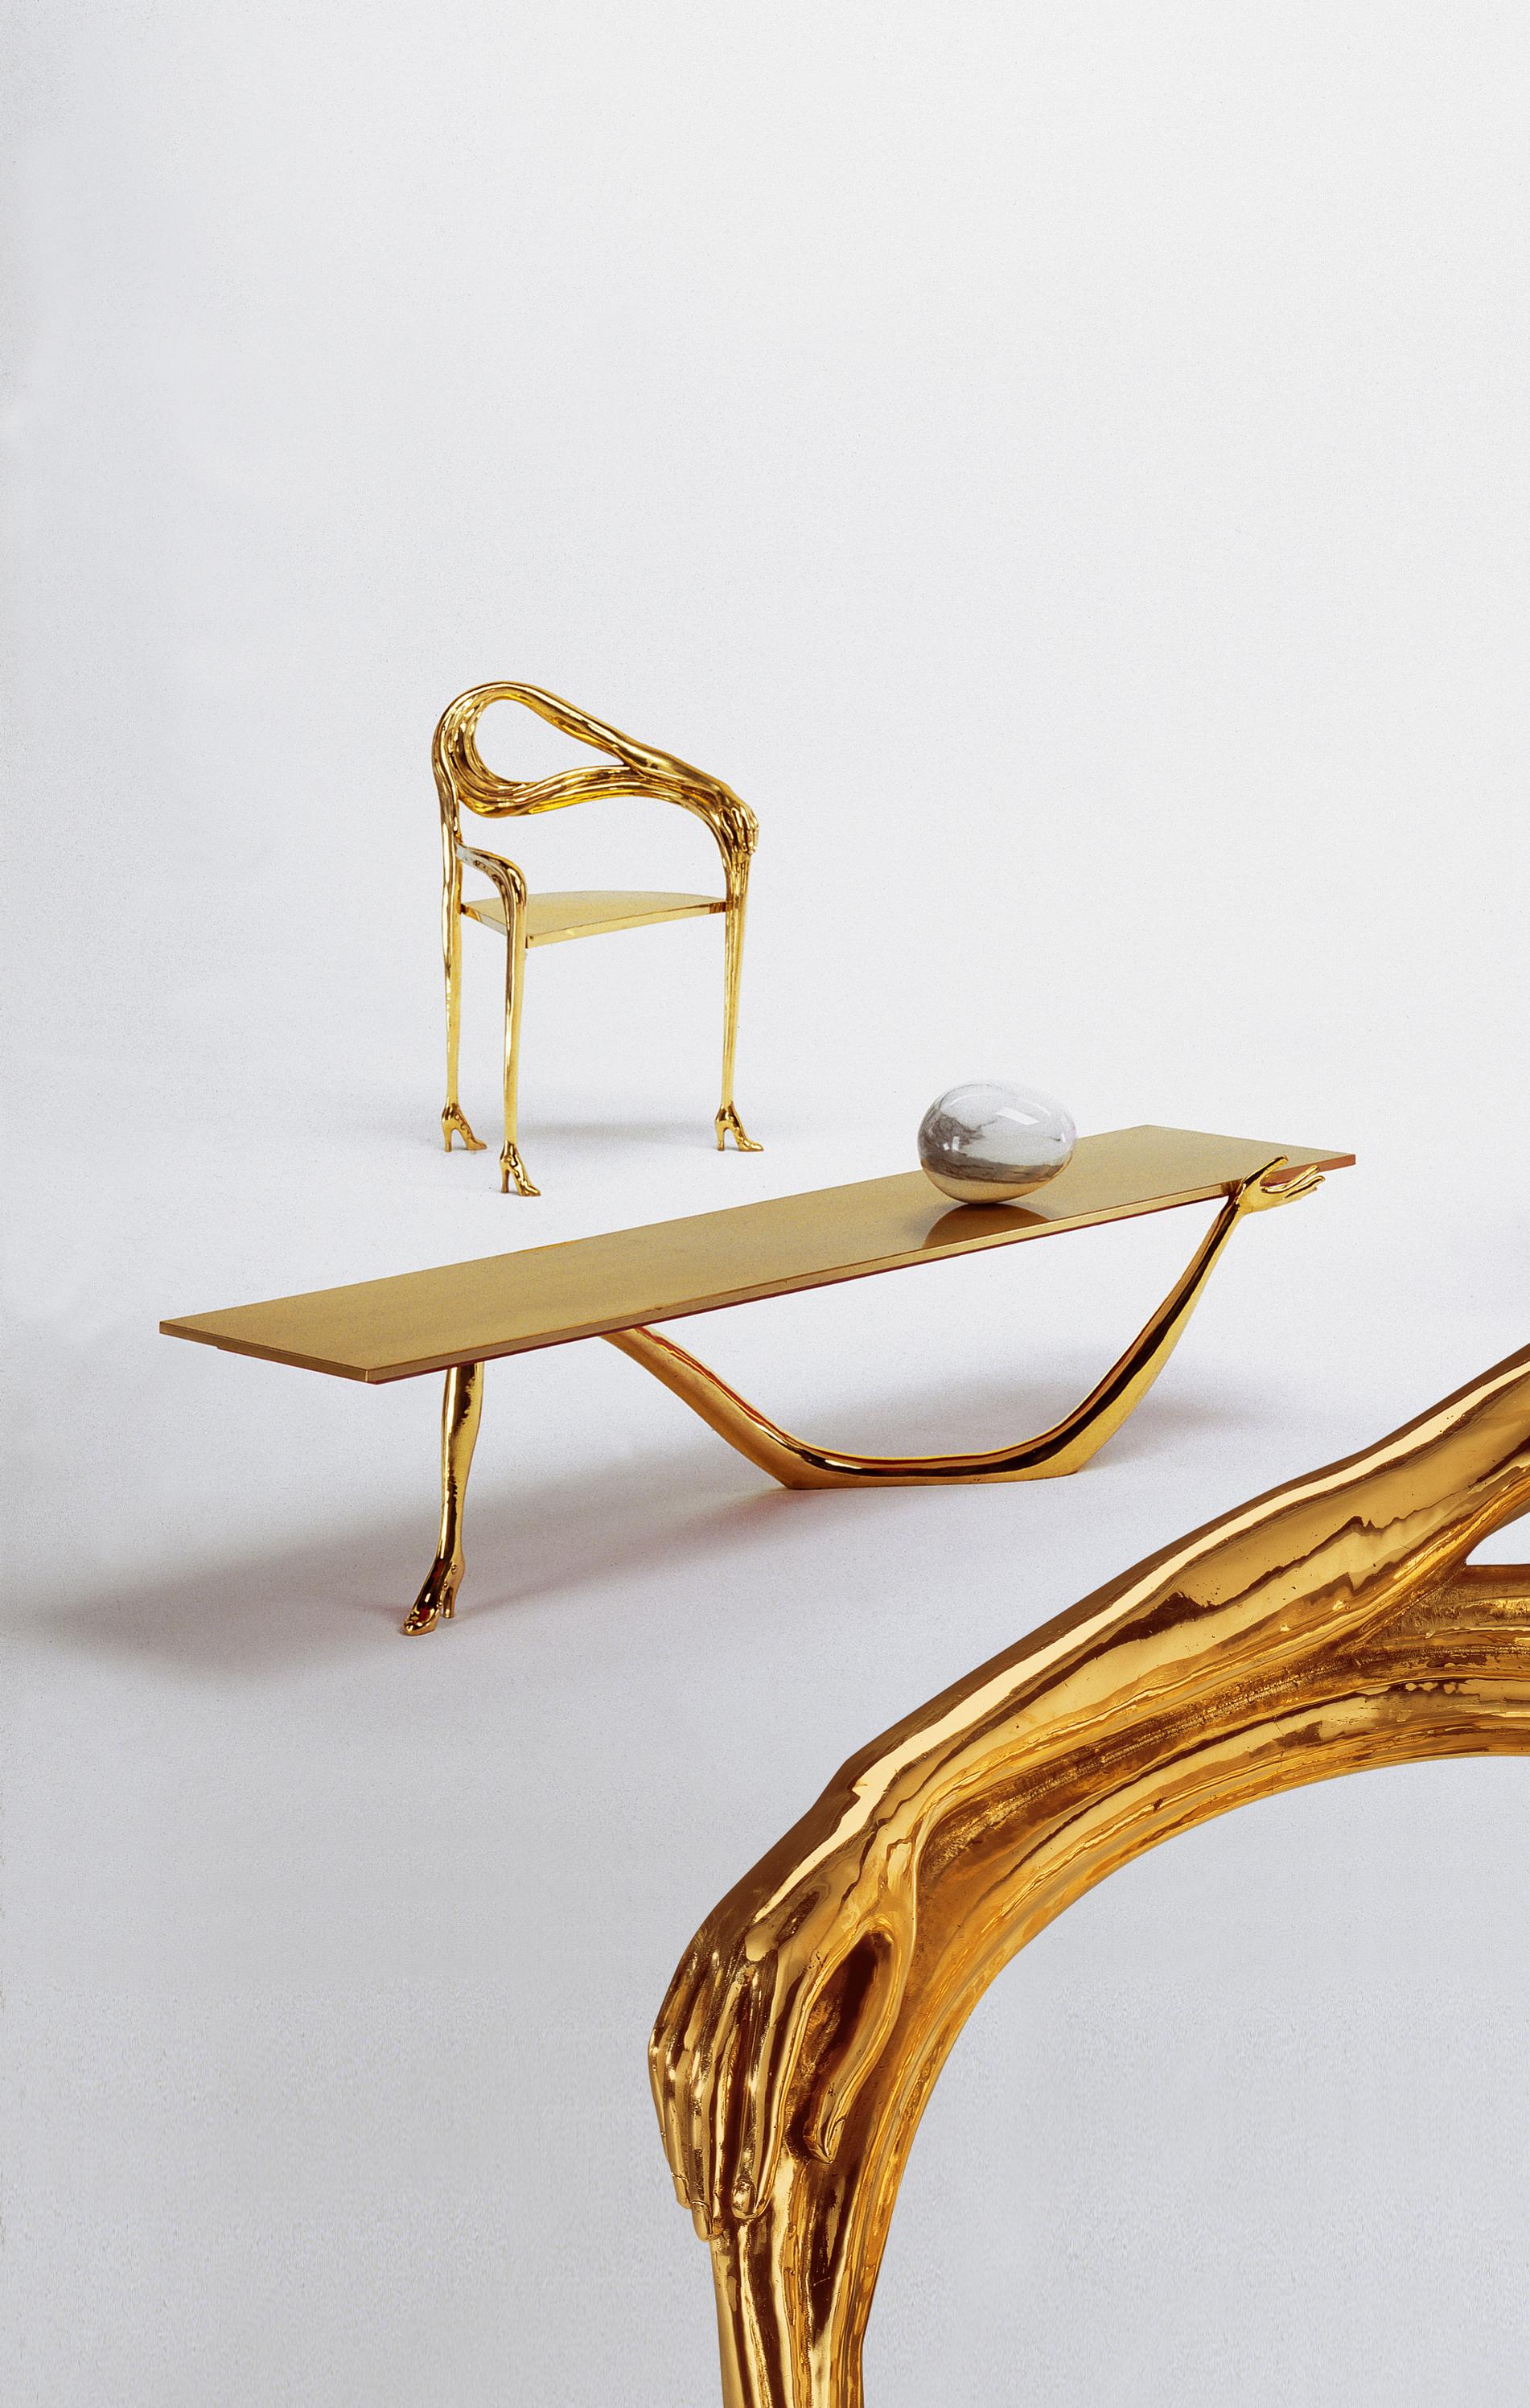 Coffee table 
Spain, 1935/37
DIMENSIONS:
Table: 1900x451xh.420mm;
Table with egg: 1900x451xh.610mm

Legs in a cast varnish brass.
Table top in brushed and varnished brass.
Carrara marble egg on top.

Taken from “Femme à tête de roses